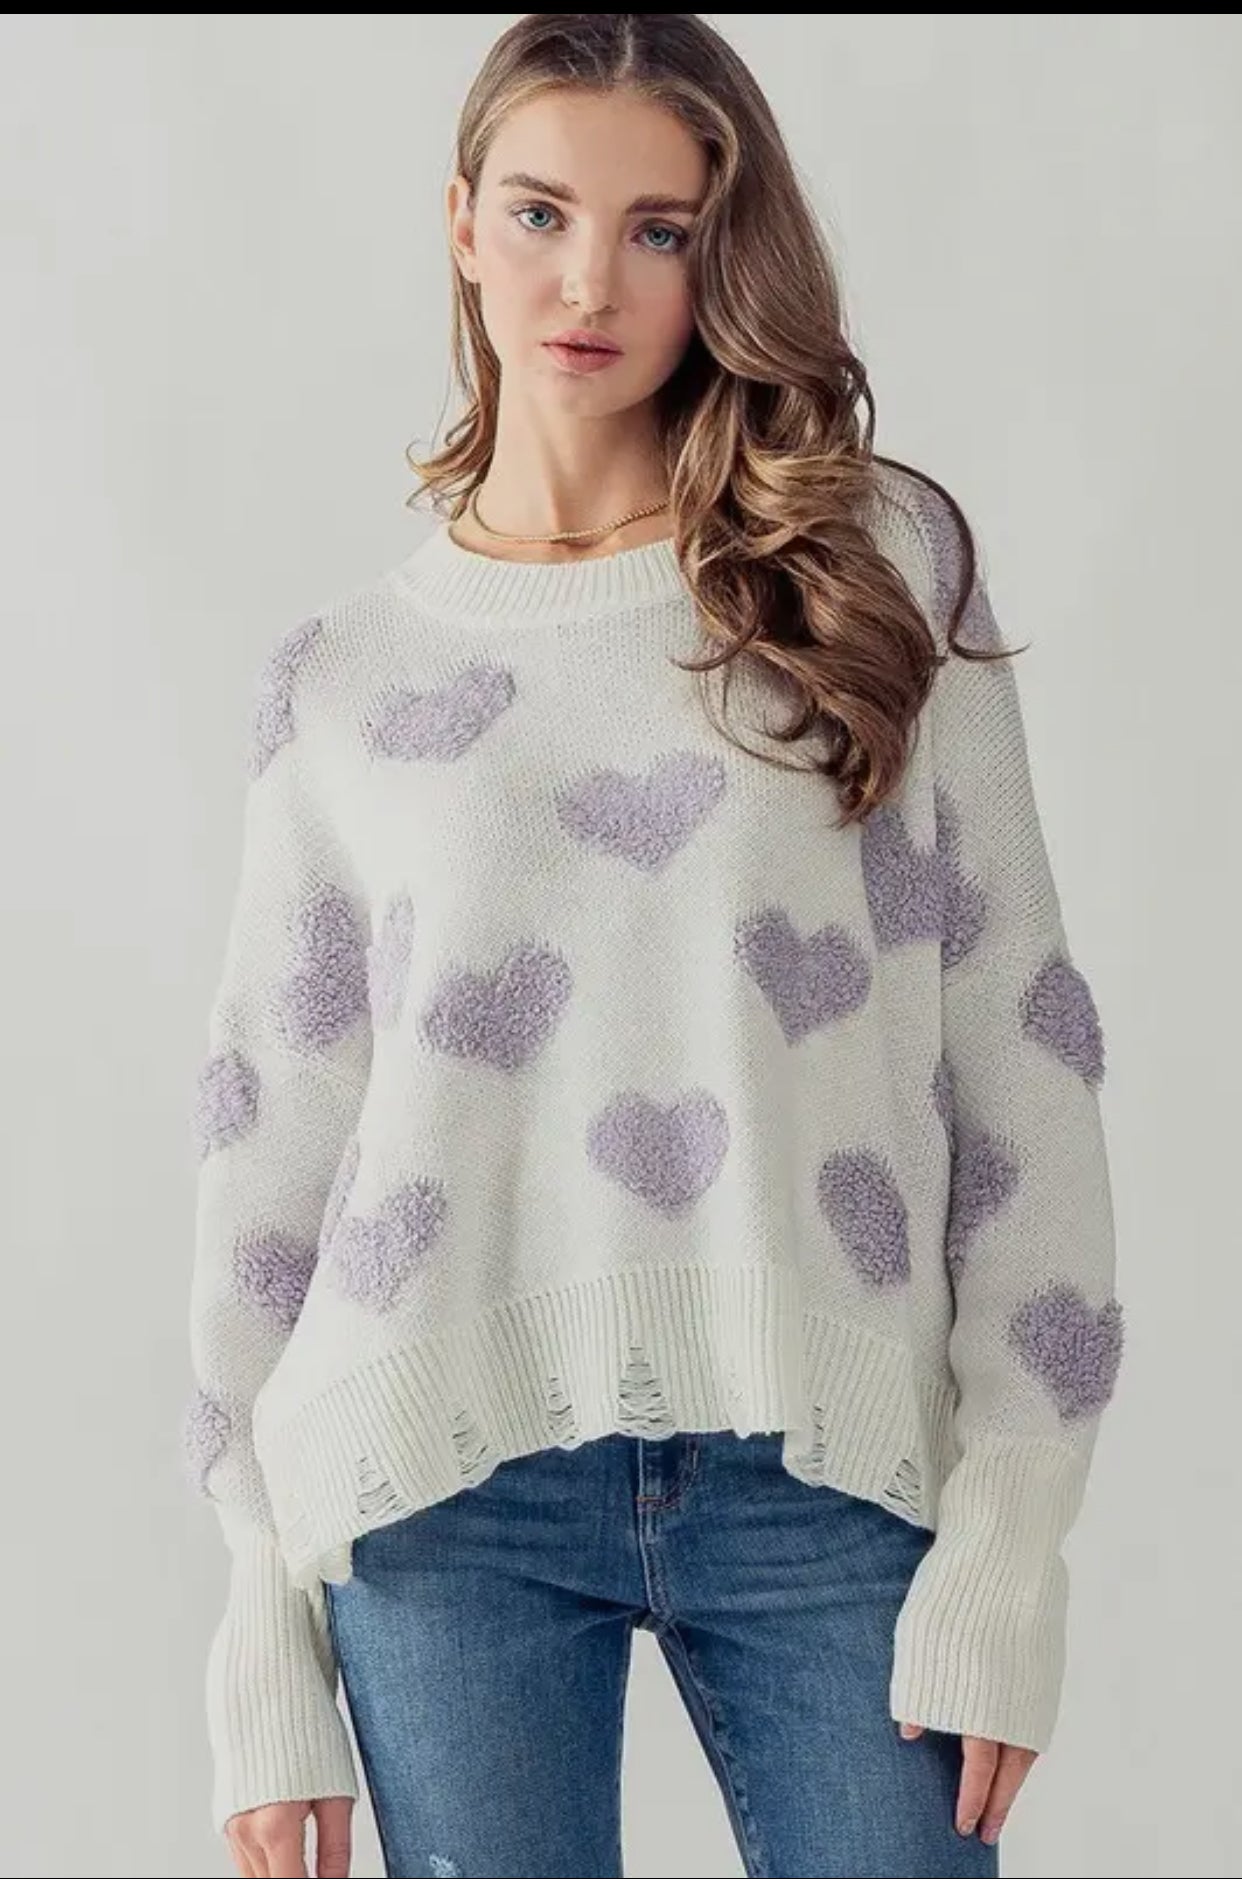 Fuzzy heart knit distressed